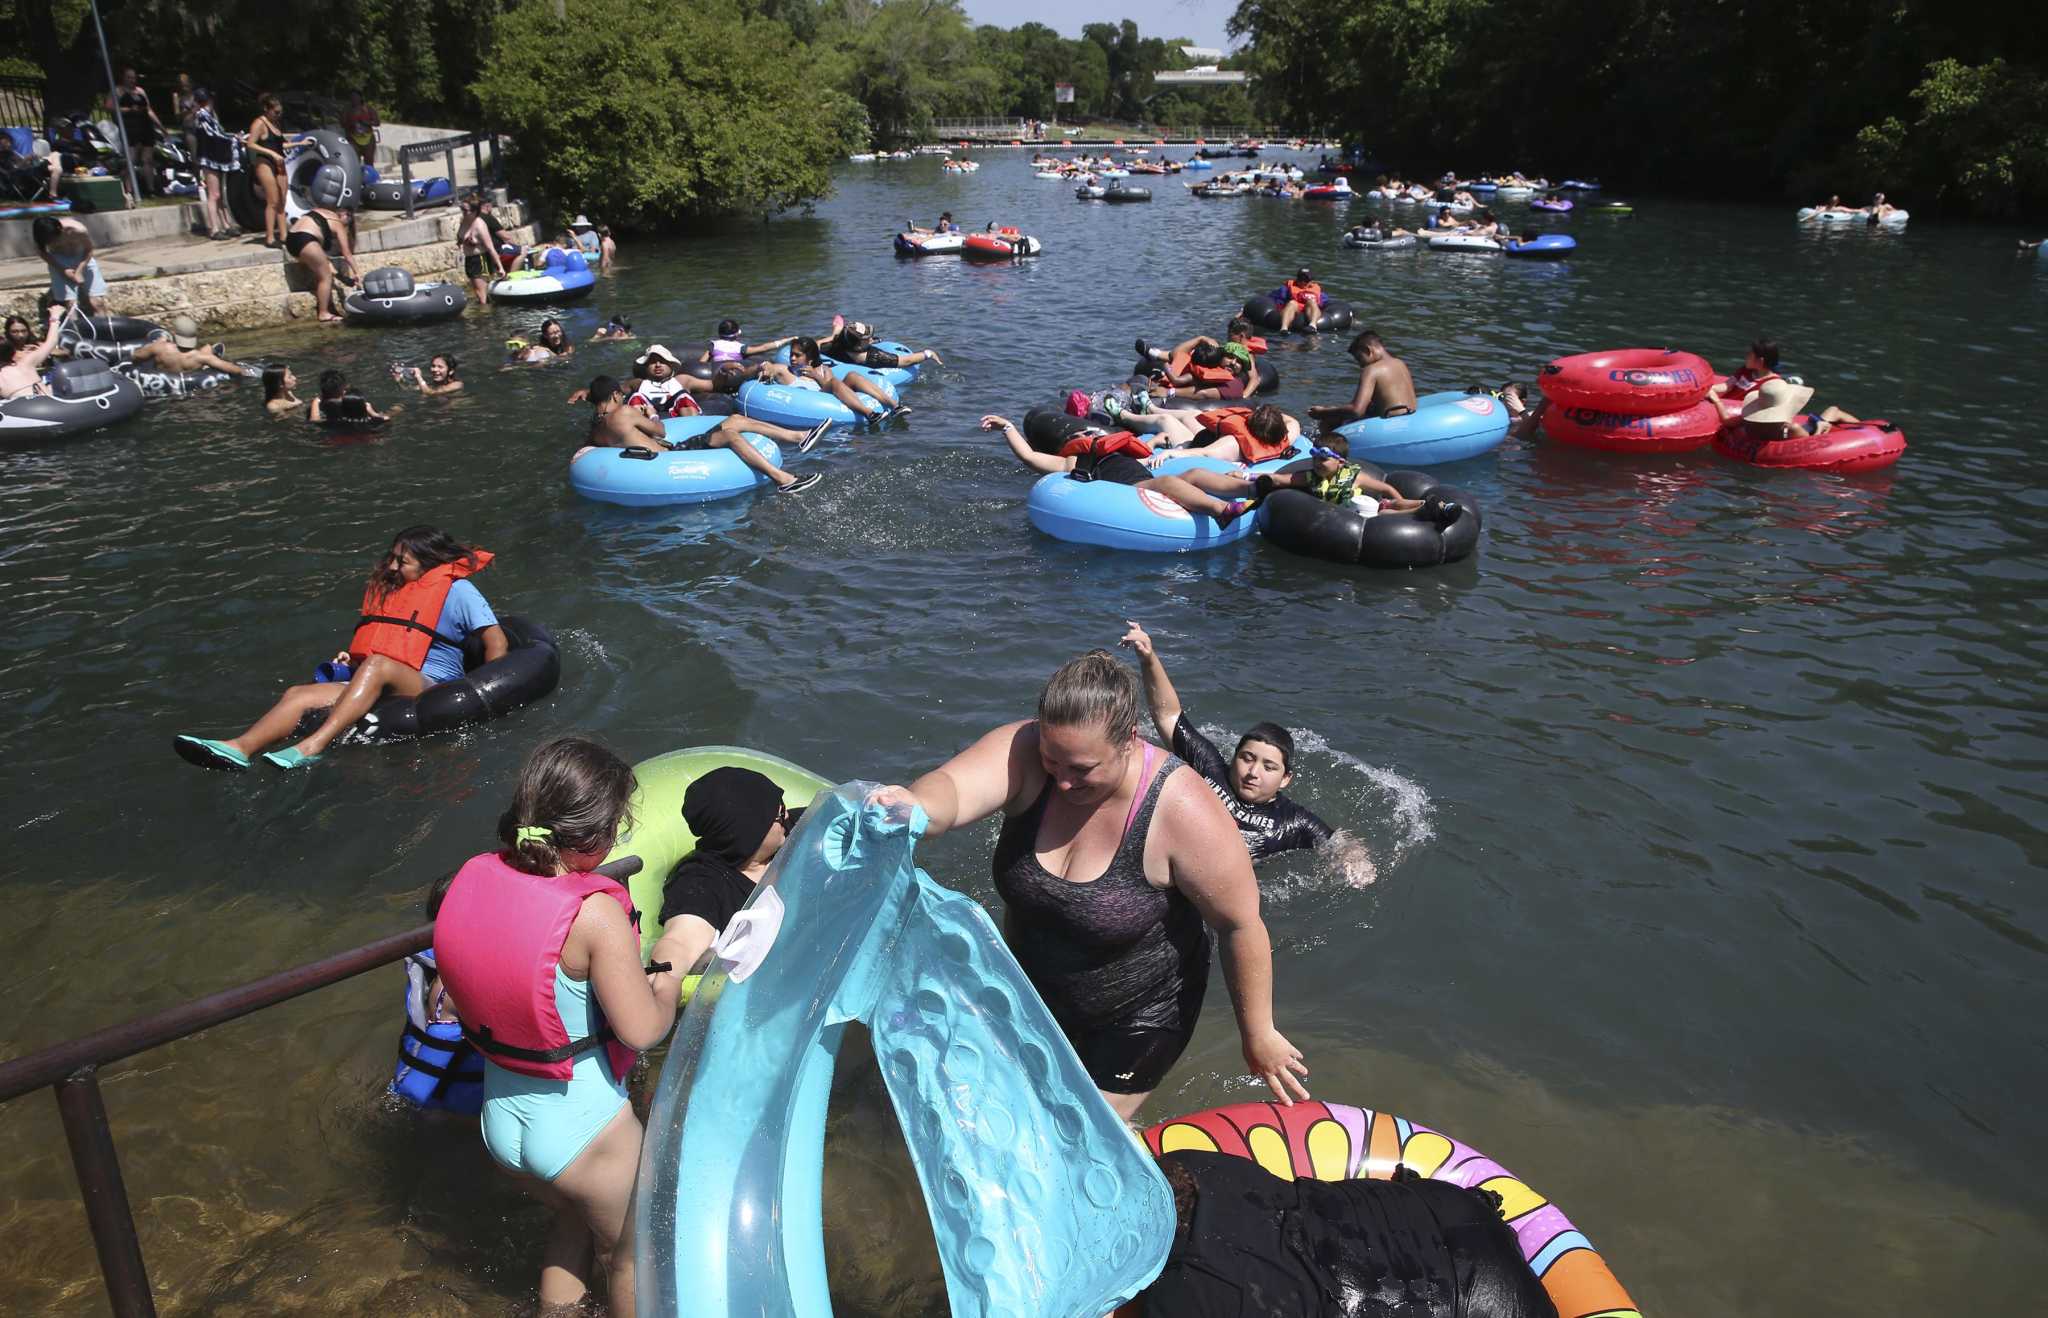 Guadalupe River Tubing, Float Trips on Inner Tubes, Tube Rentals